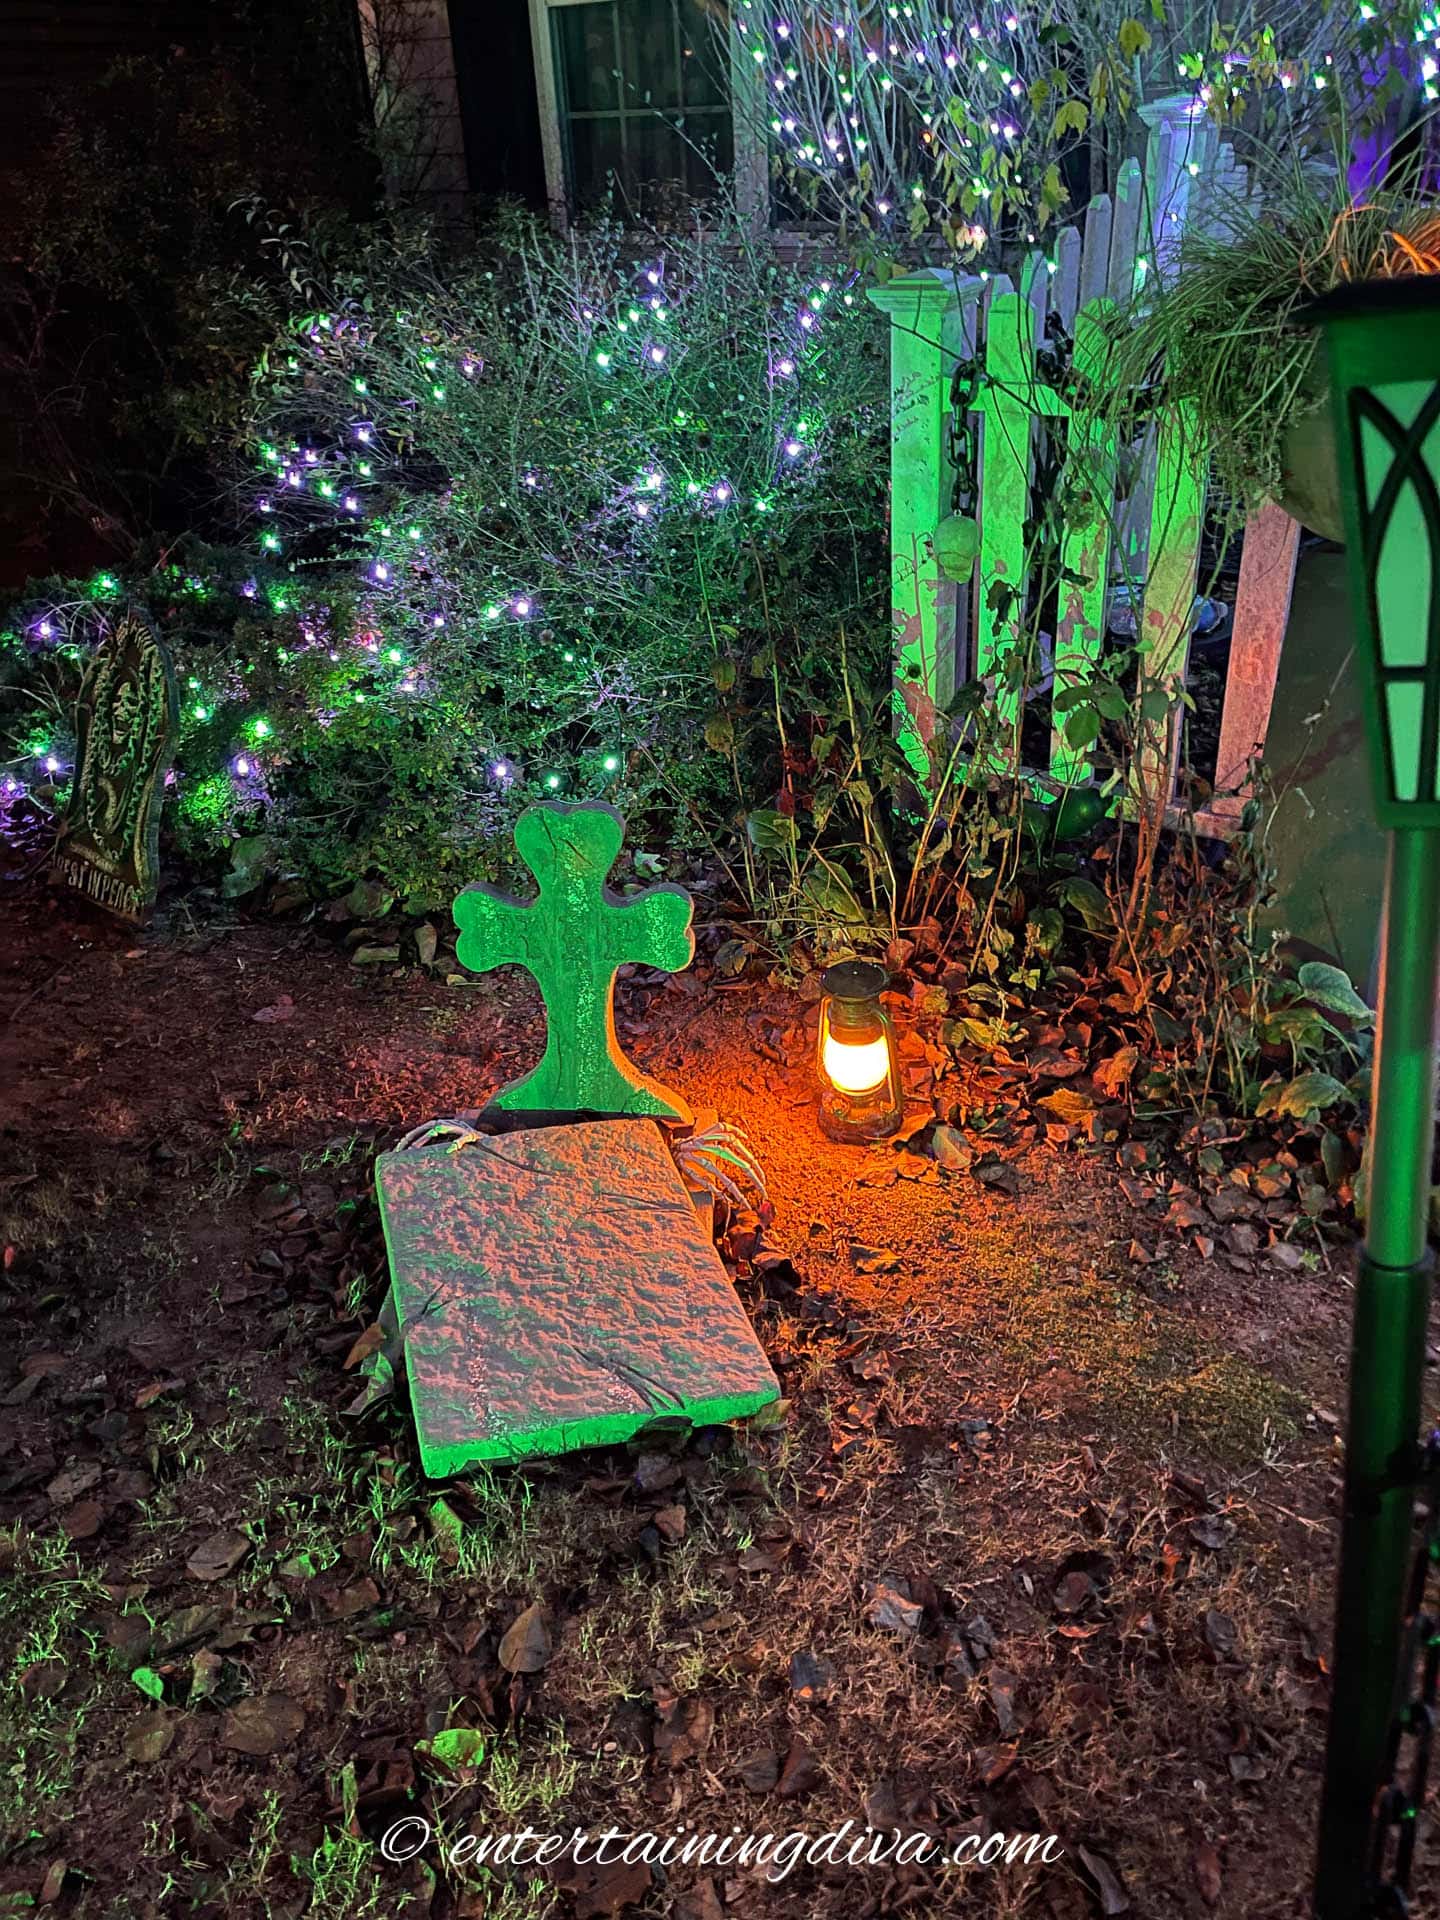 Tombstone in a Halloween graveyard lit with a green flood light